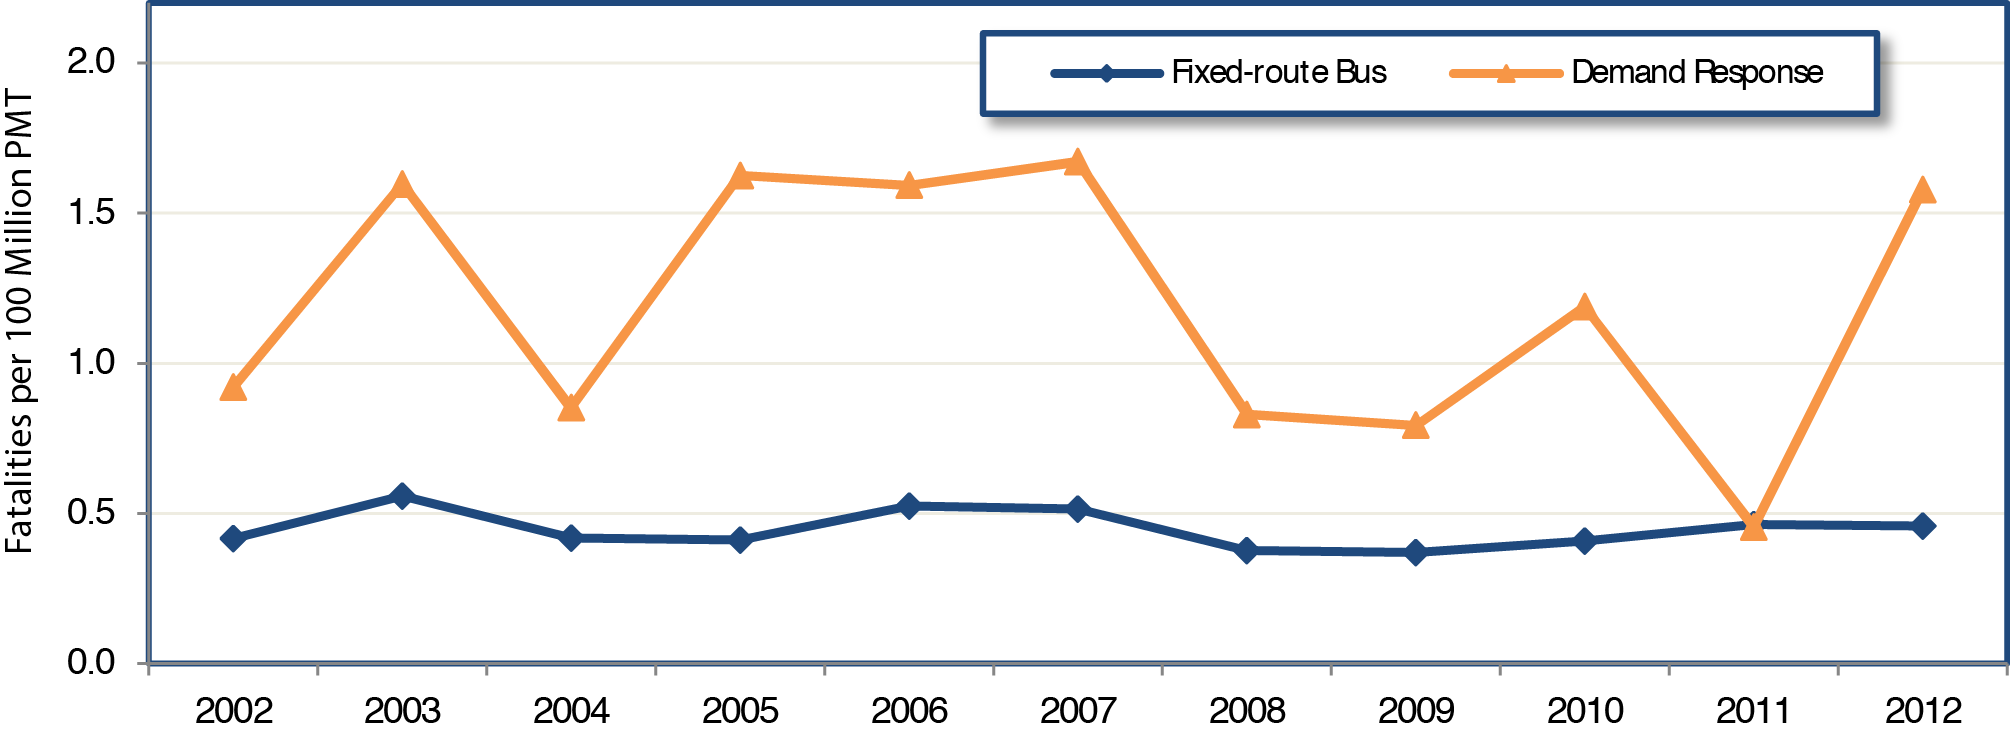 A line chart plots values for two highway mode categories over the years 2002 through 2012. The plot for fatalities per 100 million PMT for the mode fixed-route bus has an initial value of 0.42 in the year 2002 and swings slightly upward and downward from this value, ending at 0.47 in the year 2012. The plot for fatalities per 100 million PMT for the mode demand response has an initial value of 0.92 in the year 2002 and swings upward to 1.60 in 2003, downward to 0.85 in 2004, and upward again to 1.63 in 2005. The trend through 2007 is slightly upward followed by a drop to 0.83 in 2008, 0.79 in 2009, and upward to a value of 1.19 in the year 2010. The trend drops significantly to a value of 0.46 in 2011 and ends at a value of 1.58 in 2012.